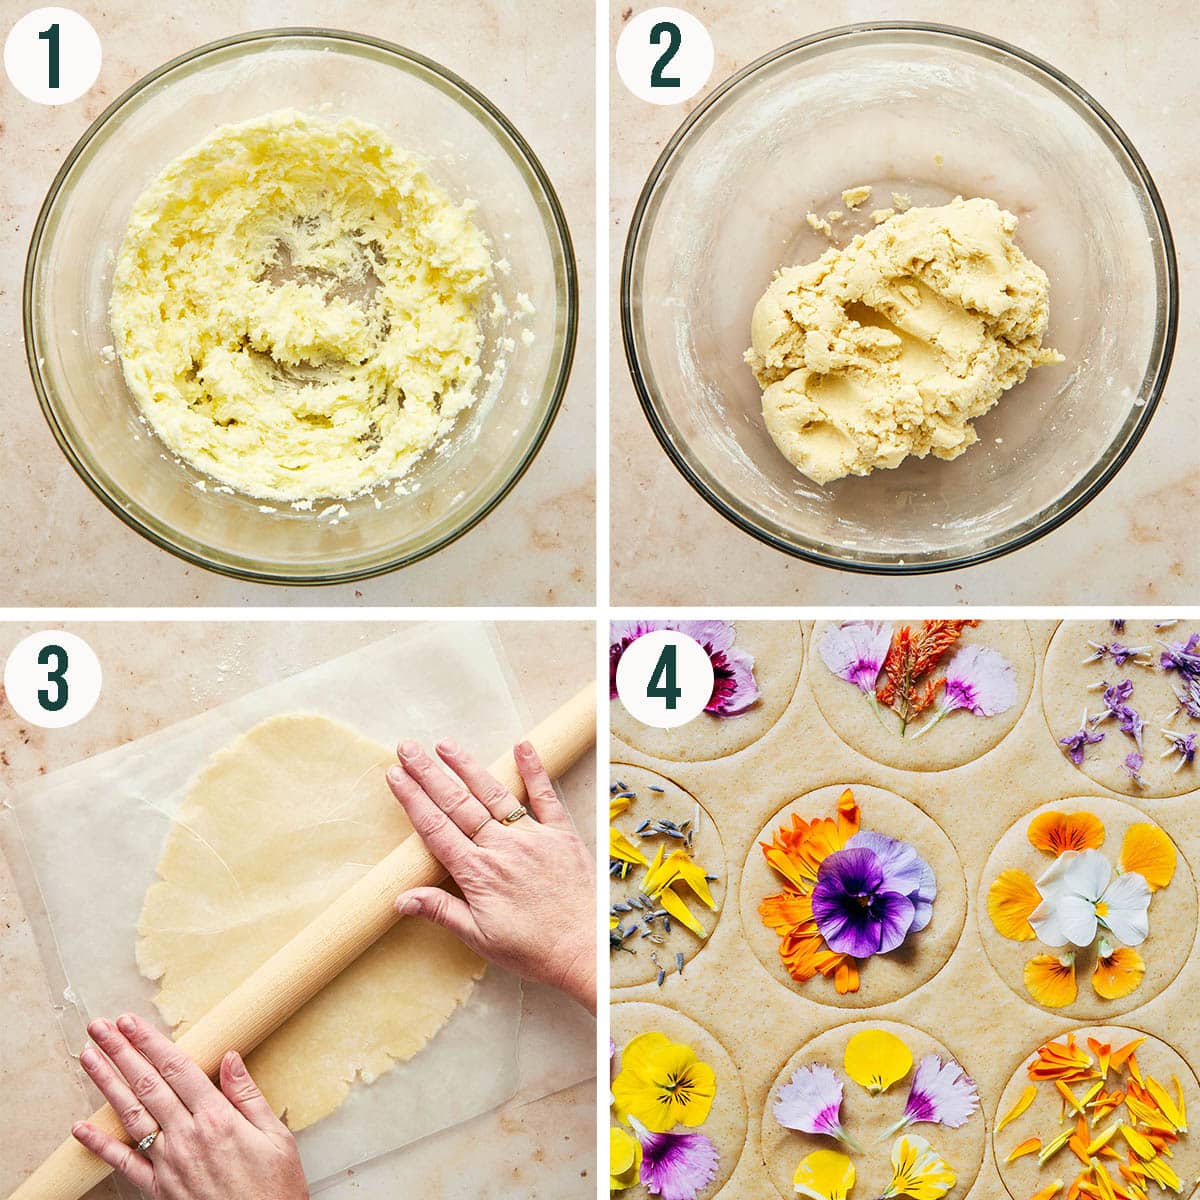 Flower cookies steps 1 to 4, making the shortbread base and with flowers added.